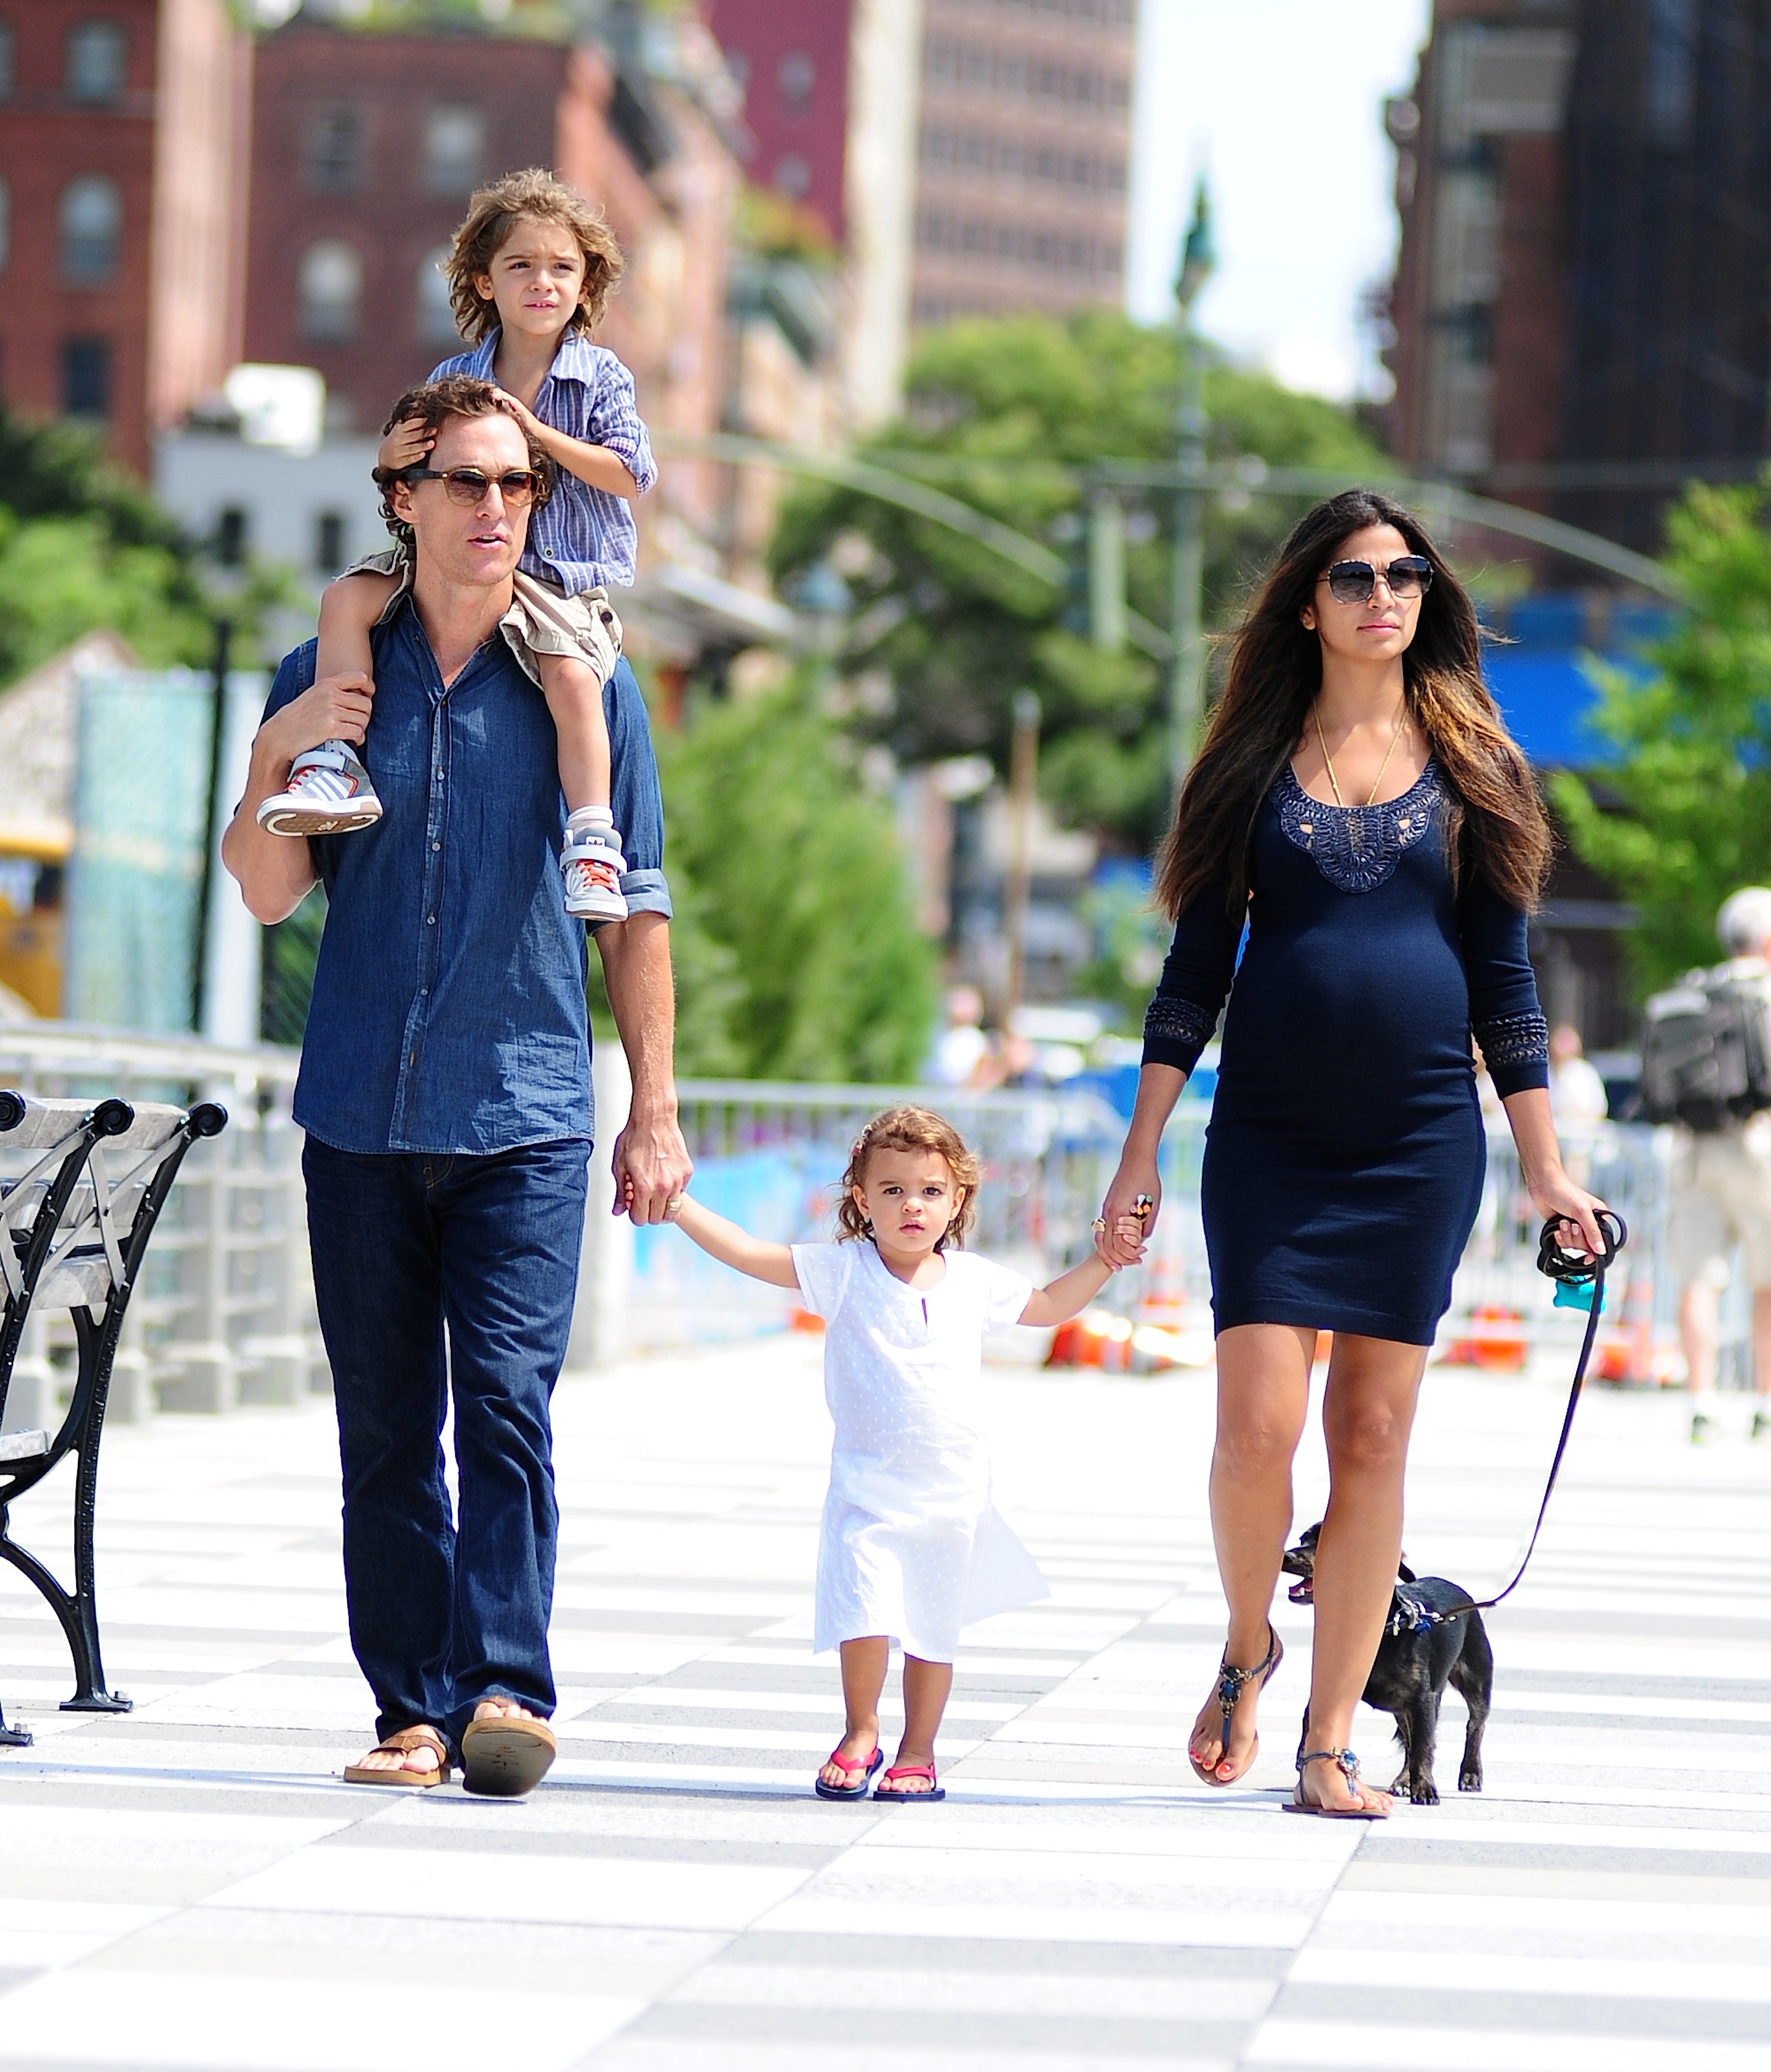 Matthew McConaughey, Levi Alves McConaughey, Vida Alves McConaughey, and Camila Alves seen in Tribeca on August 26, 2012, in New York City | Source: Getty Images